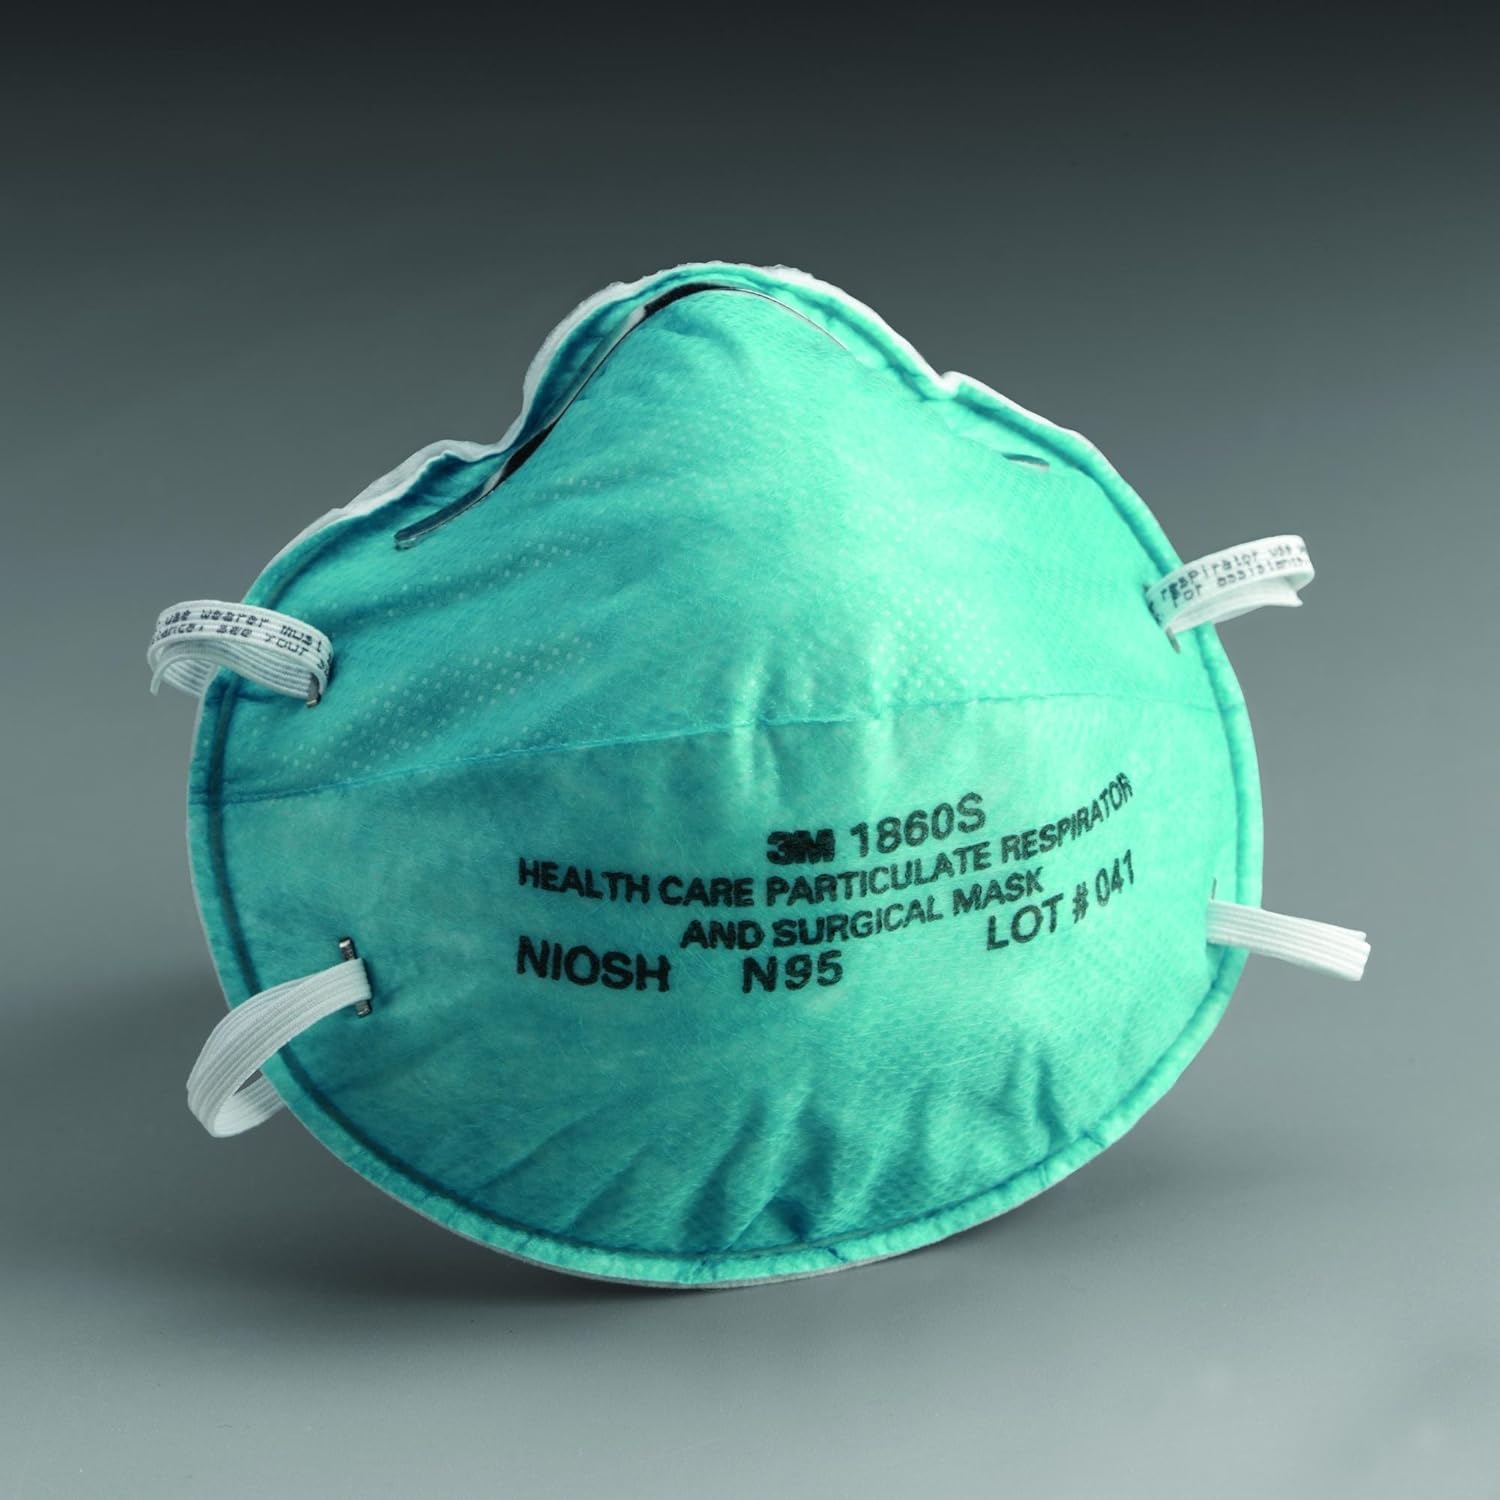 3M 1860S Particulate Respirator and Surgical Mask, Box of 20